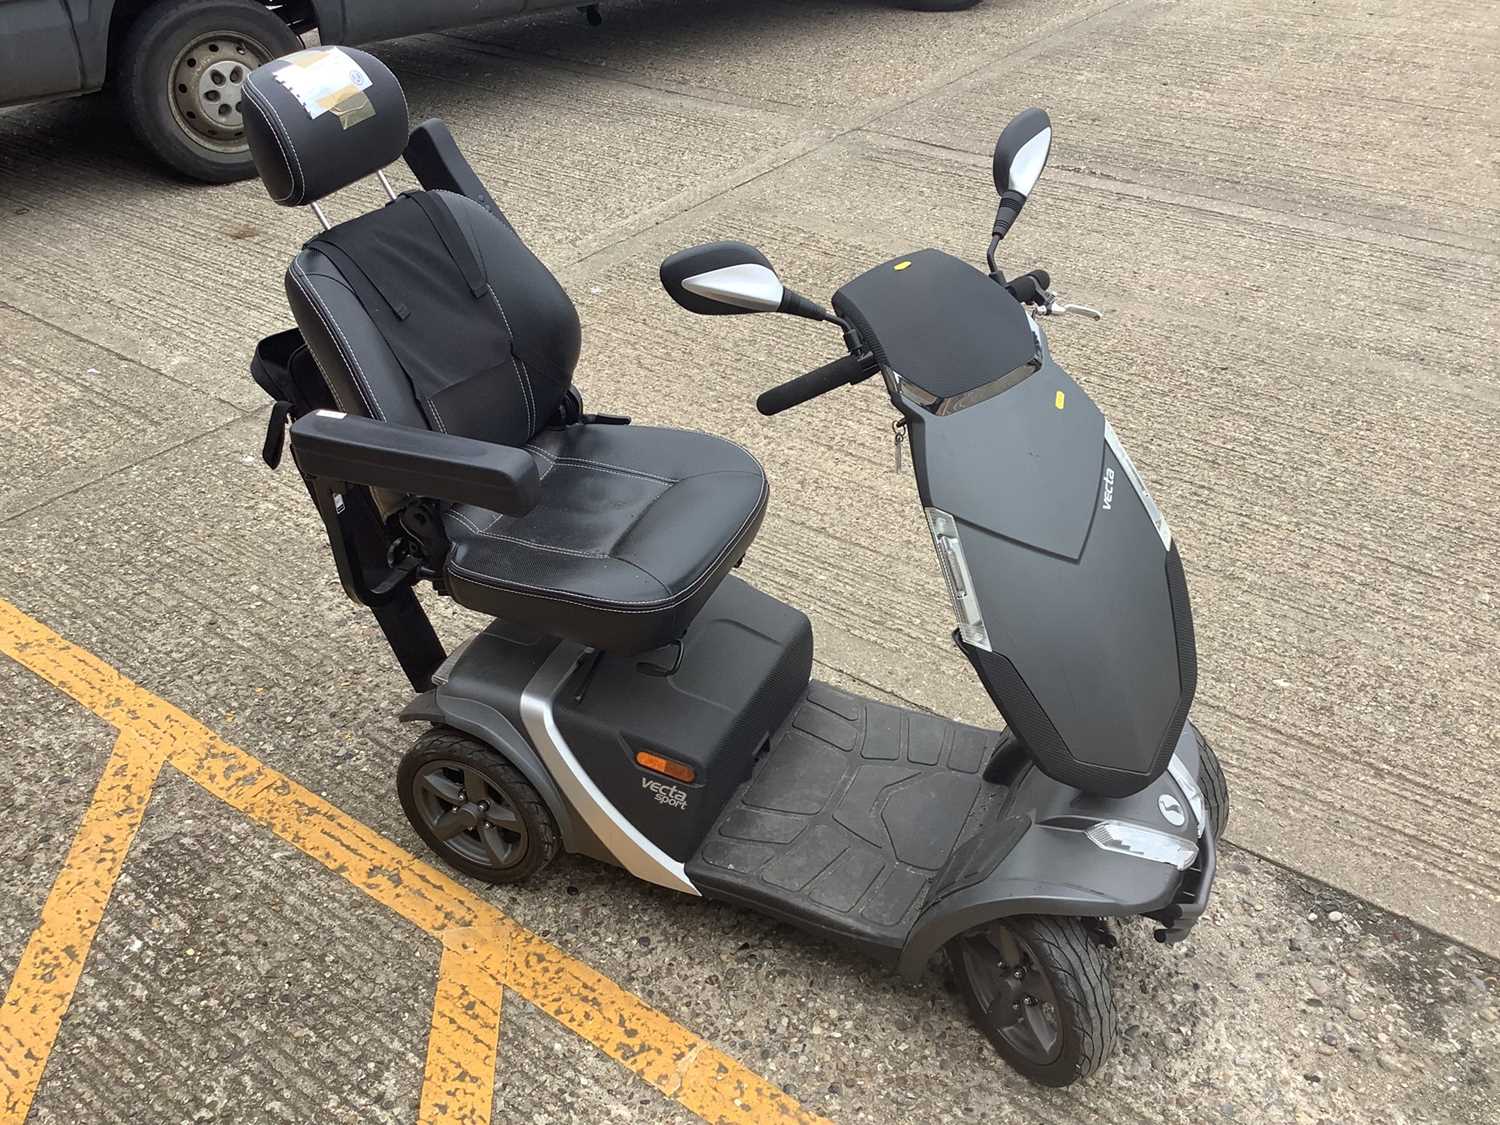 Rascal Vecta Sport mobility scooter together with Key and charger